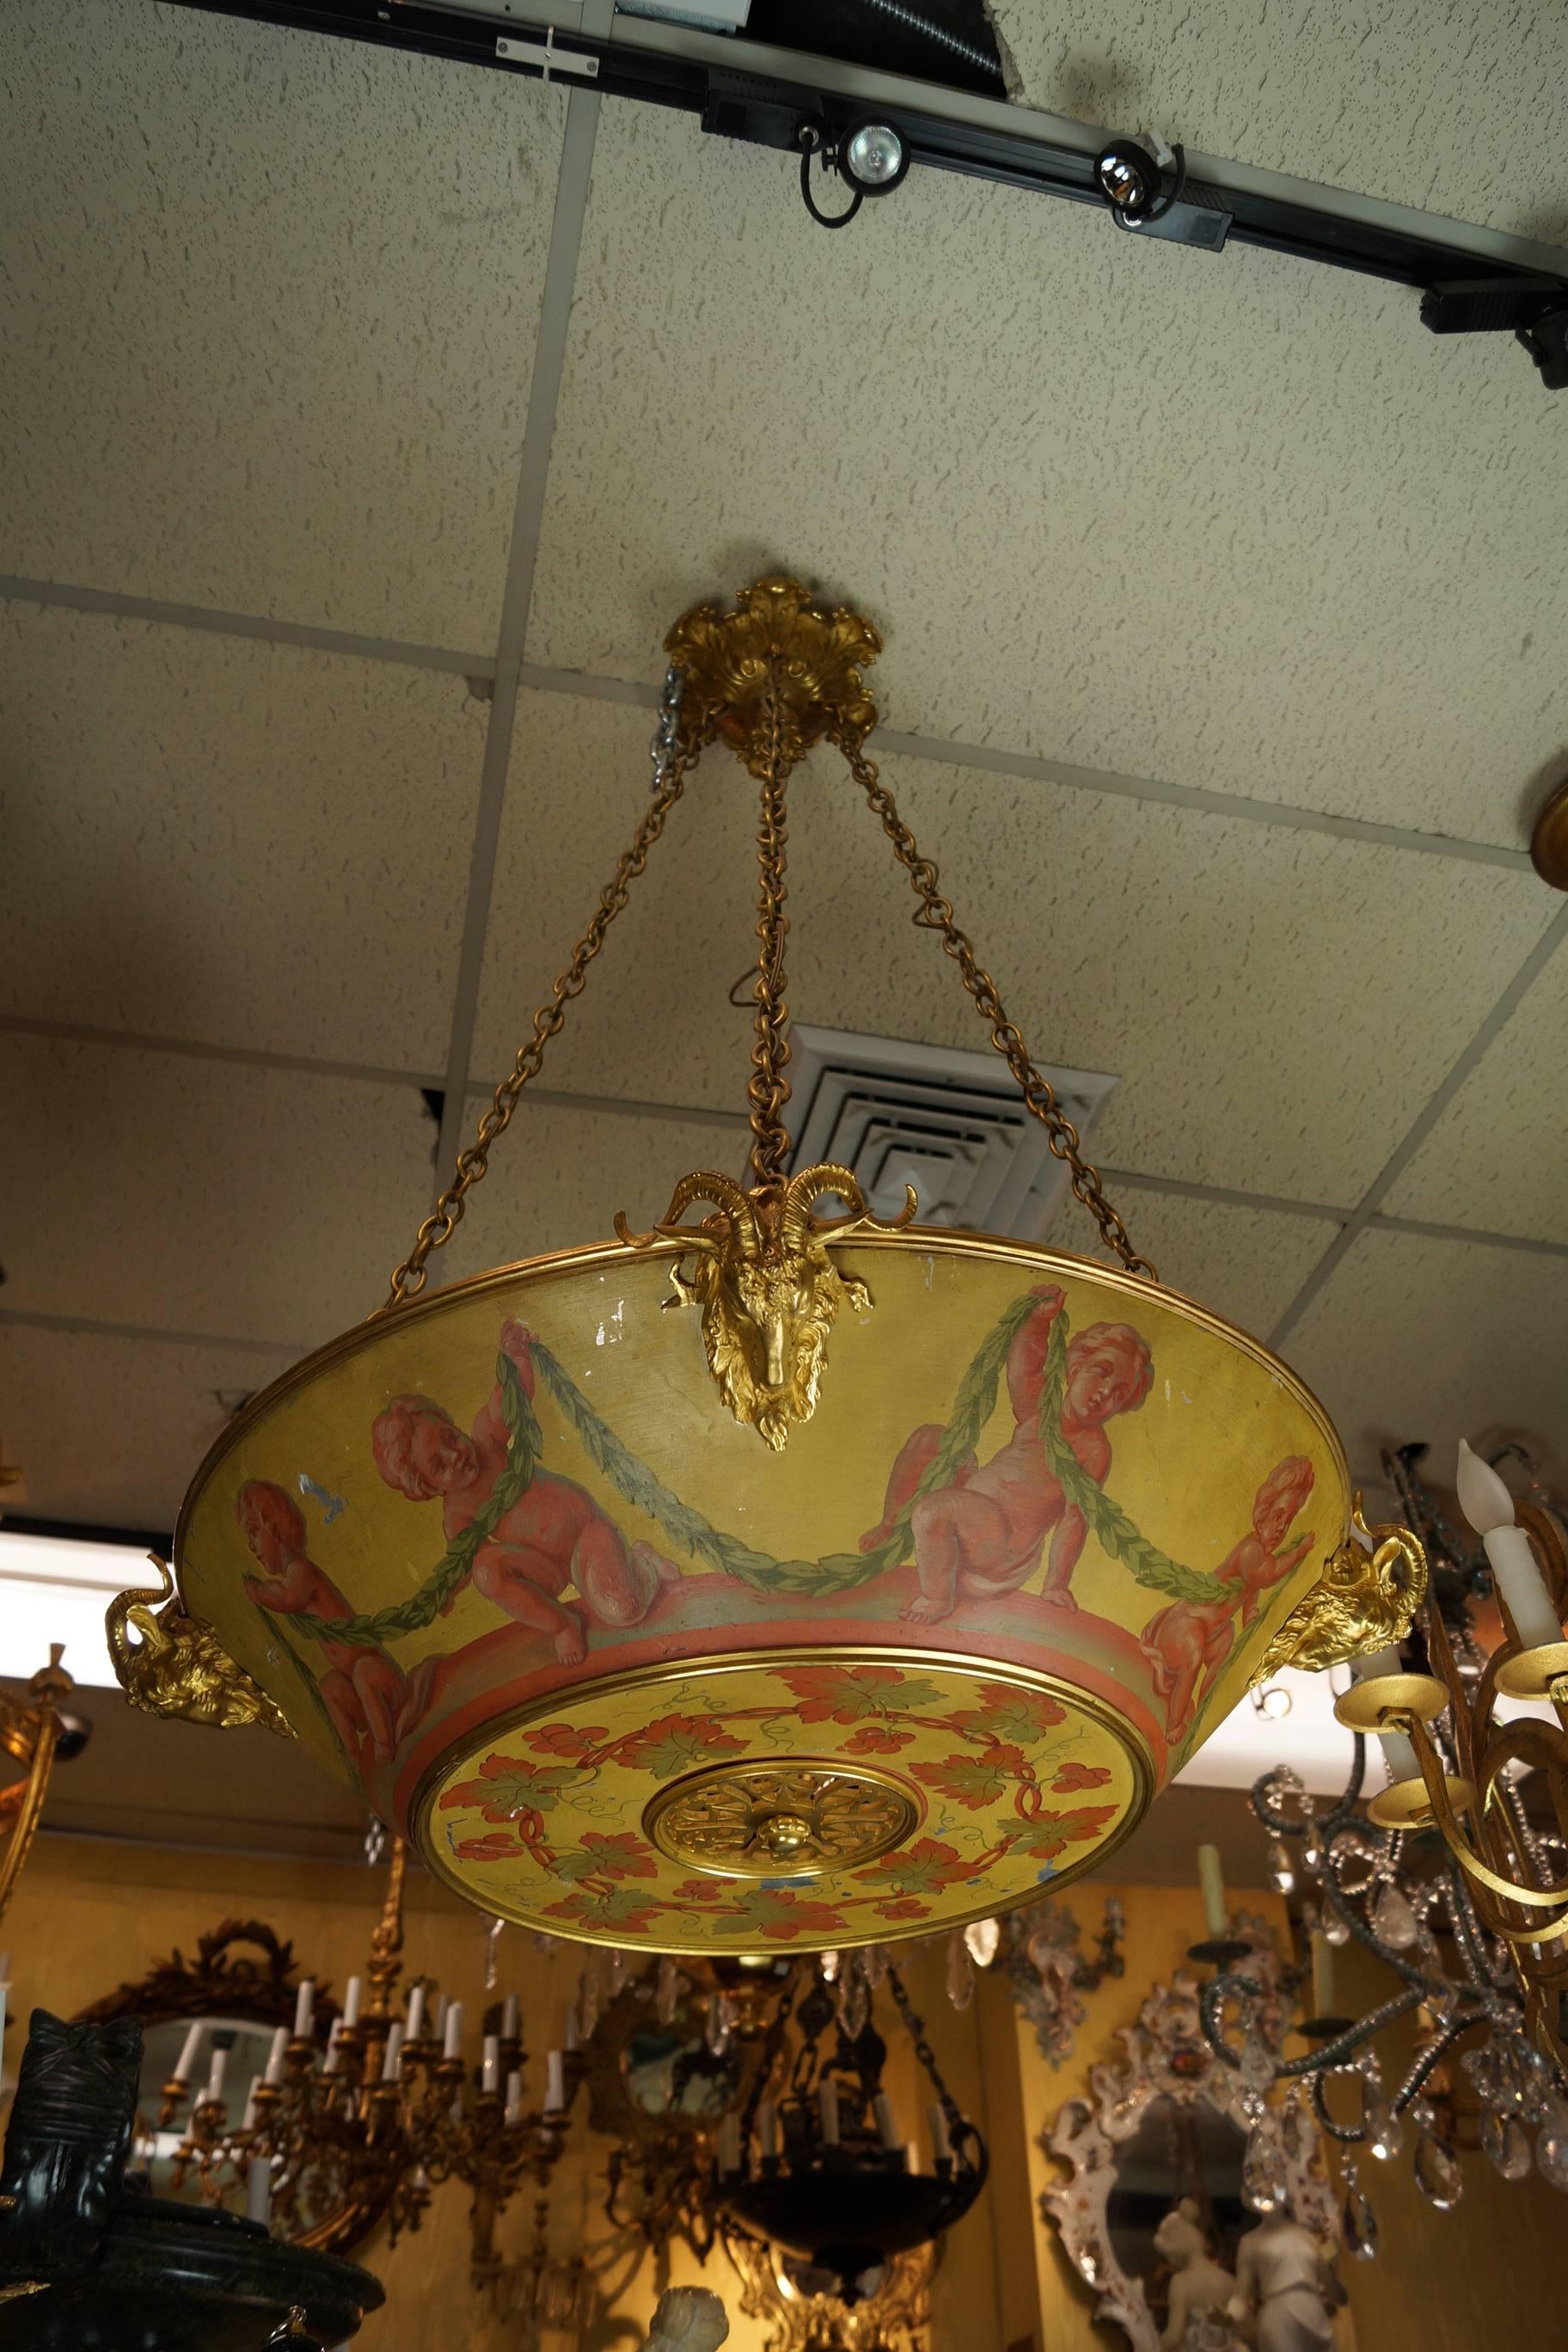 Neoclassical painted tole and bronze chandelier with cherubs and garland
with ram’s head and leaf design attributed to Caldwell.
Stock number: L403.